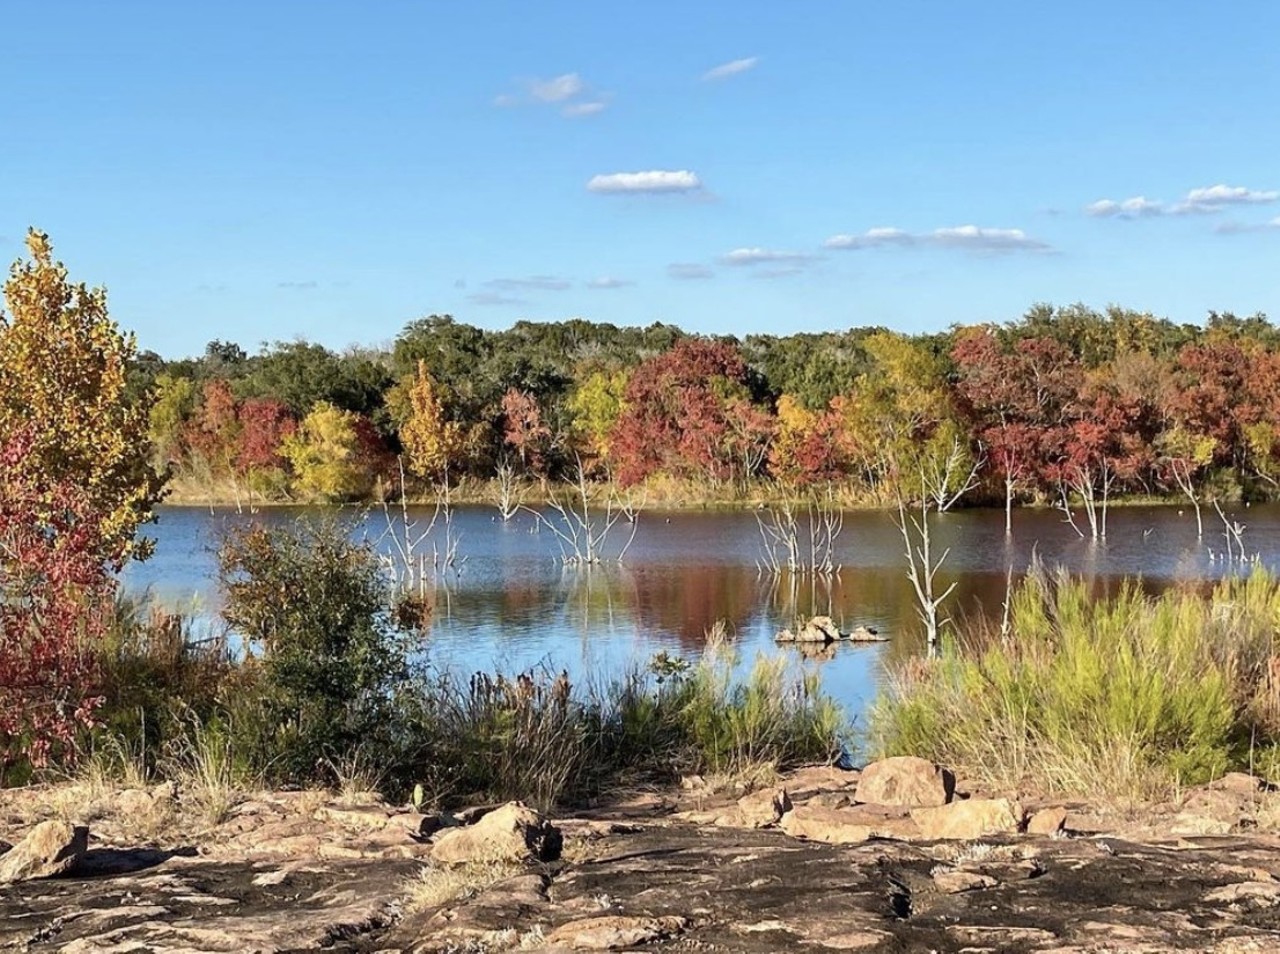 Inks Lake State Park
3630 Park Road 4 W, Burnet, (512) 793-2223, tpwd.texas.gov
If you’re looking for hills, Inks Lake is worth the visit. With a variety of trees and plants – cedar, live oak, prickly pear cacti and yucca – the landscape here is absolutely gorgeous. North of Austin, Inks Lake is a prime spot to appreciate nature, which you can do while camping, backpacking, picnicking and hiking. Just make it a point to swing by the Devil’s Waterhole.
Photo via Instagram / inkslakesp